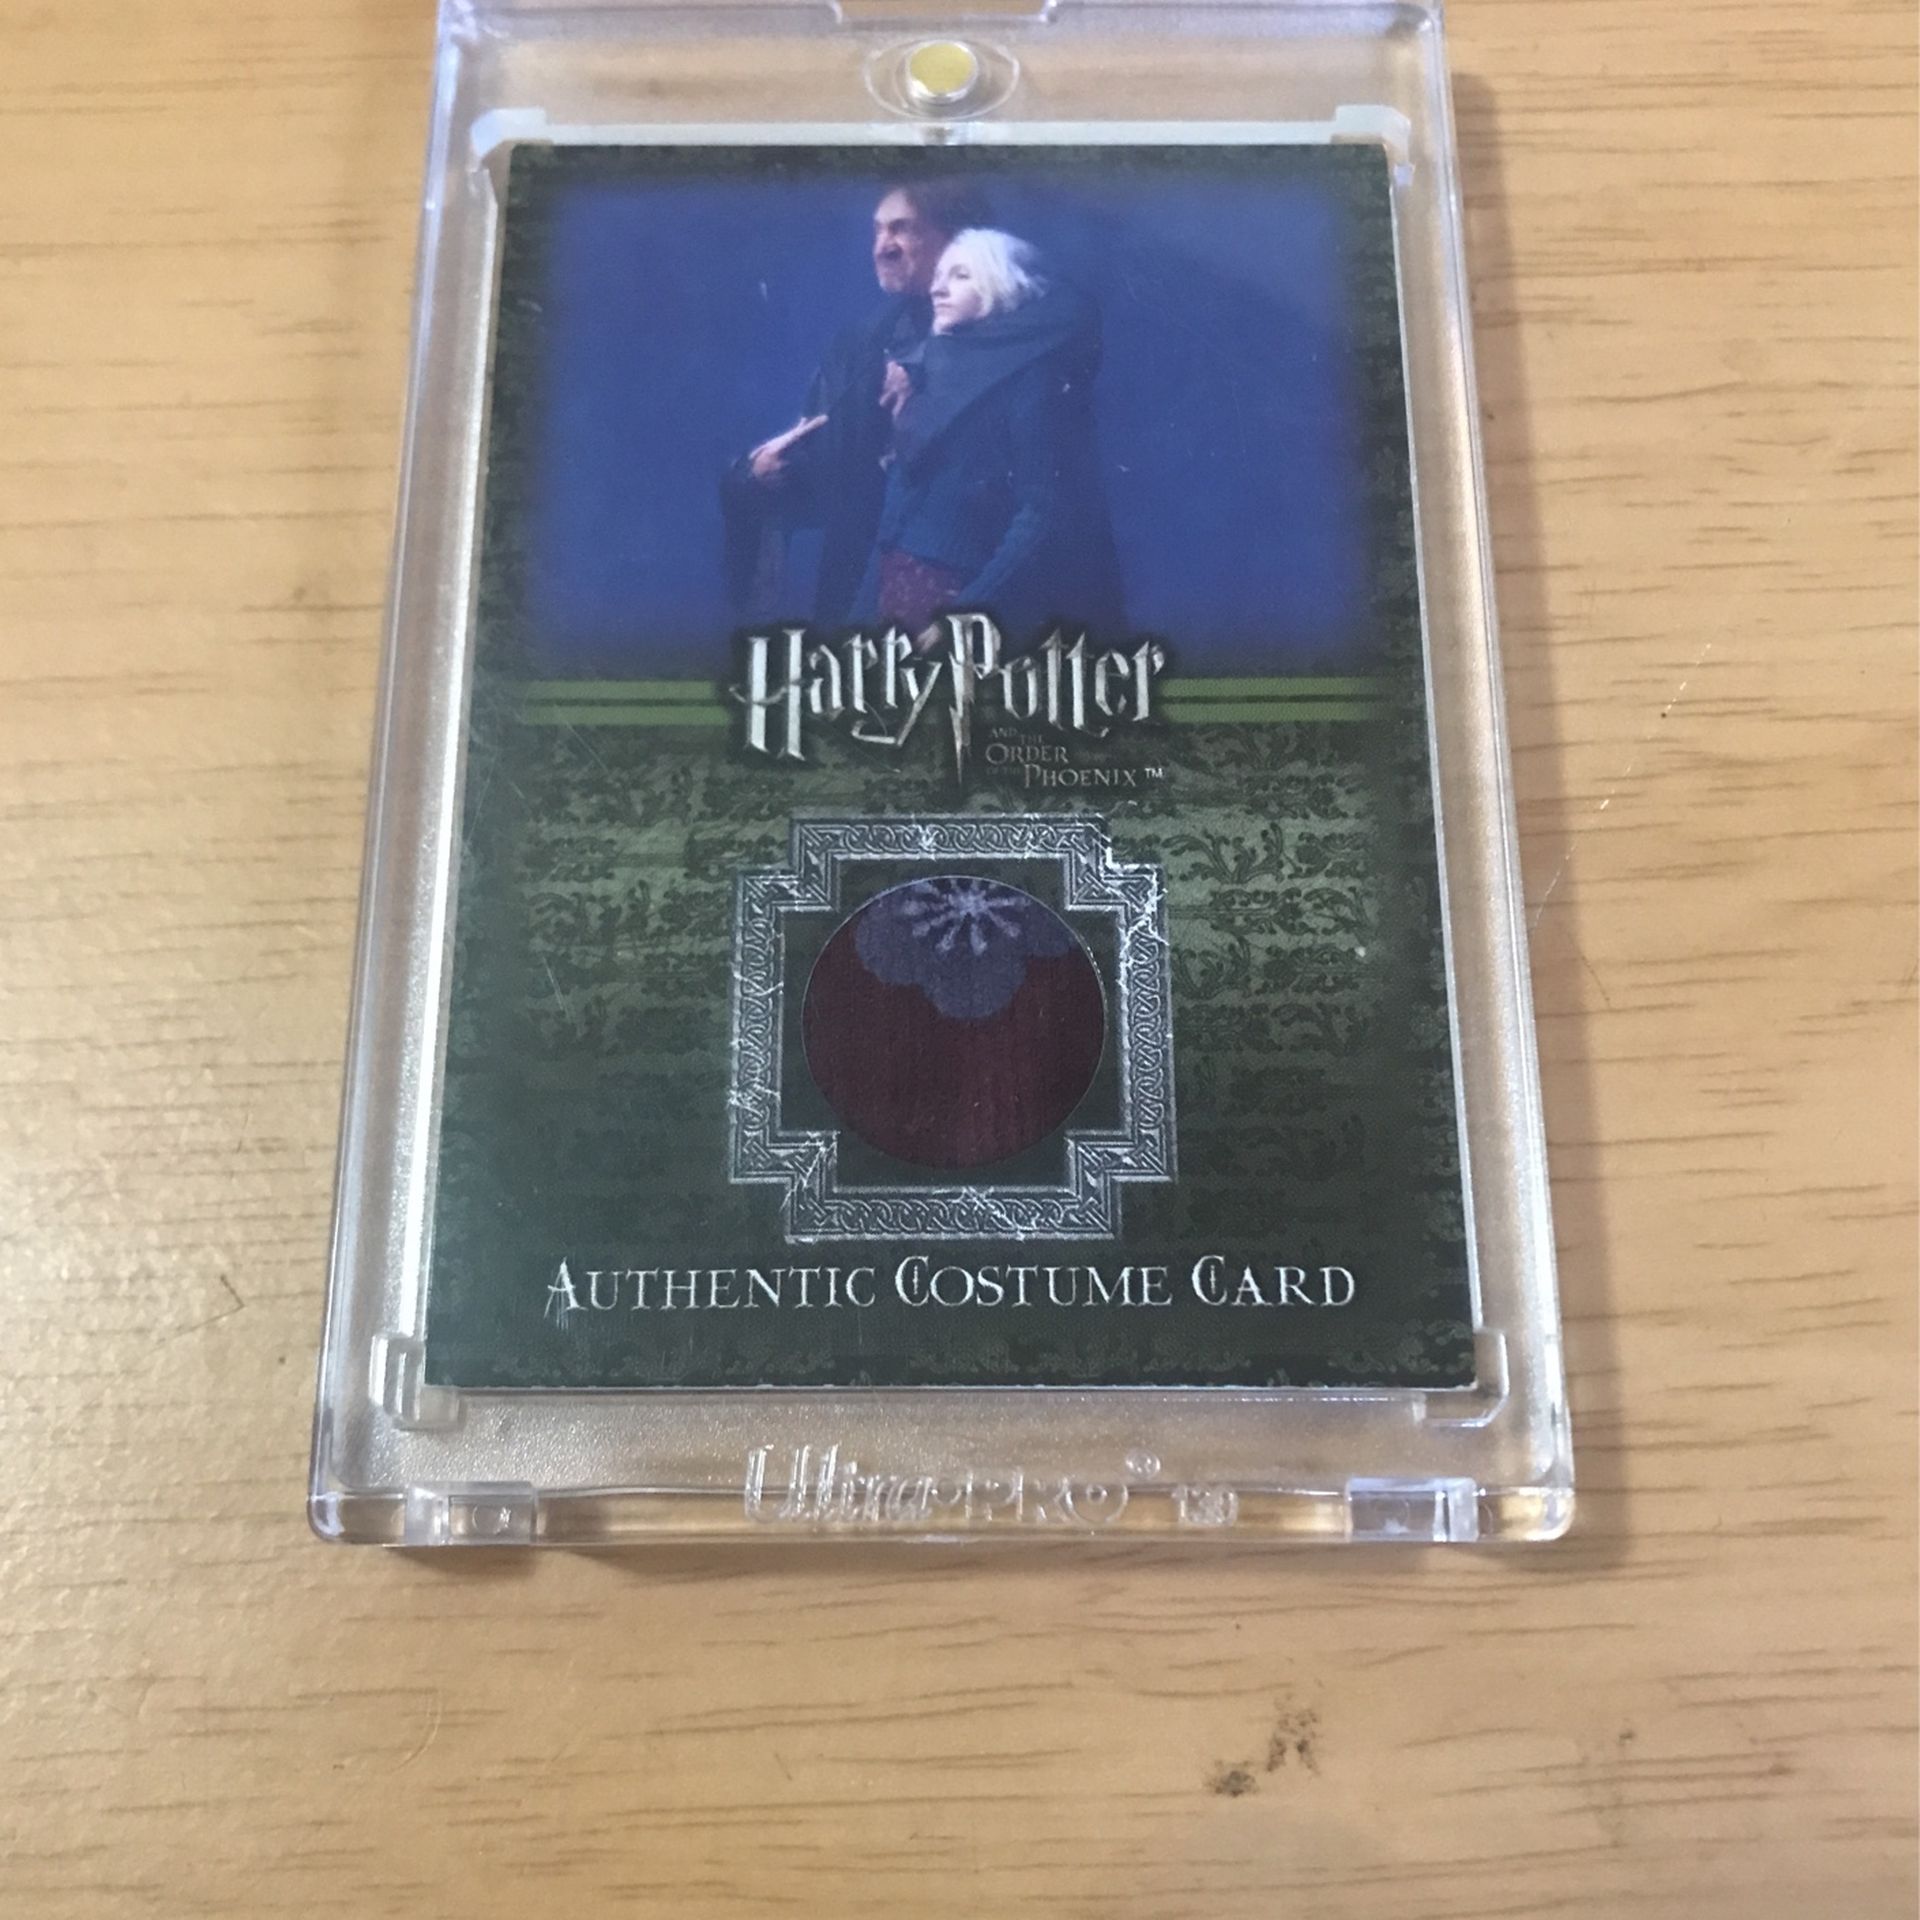 Harry Potter Authentic Costume Card #501/570